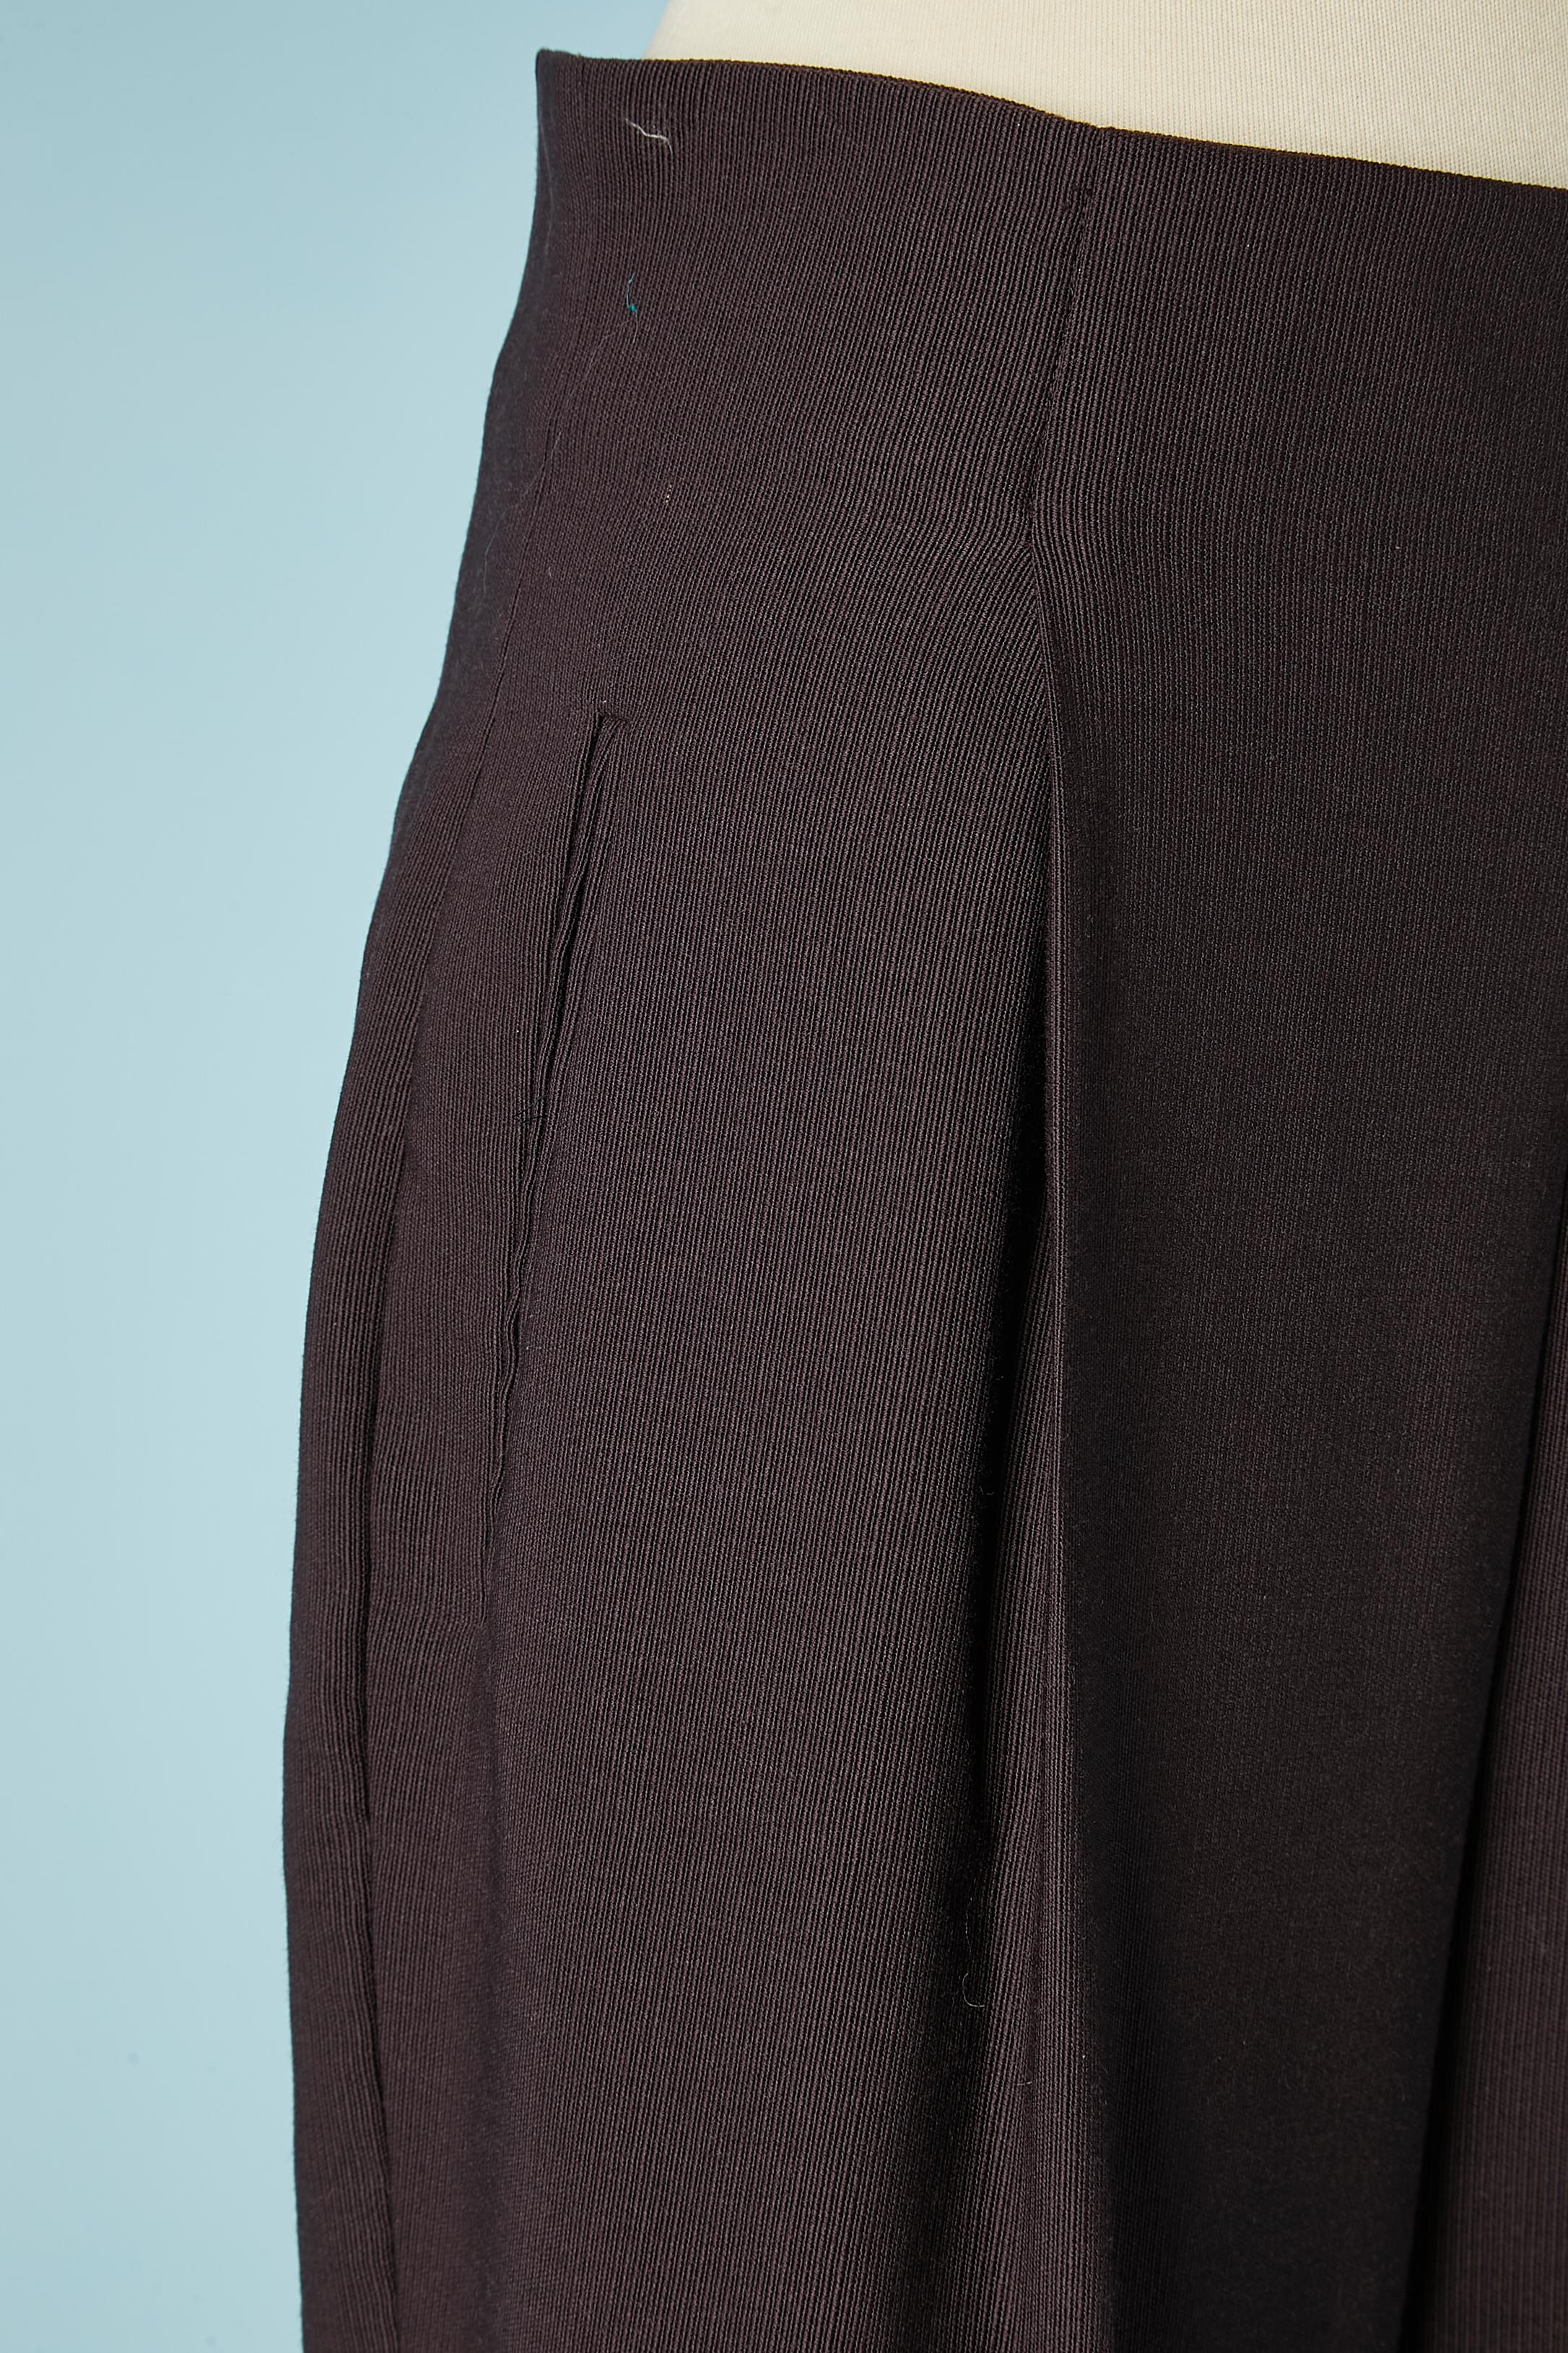 High-waisted Wool burgundy trousers . 4 pockets, 2 on the side and 2 on  the back close with button & buttonhole. Cotton pocket's lining. Zip closure on the left side of the waist.
SIZE 46 (It) 42 (Fr) 12 (US) L 